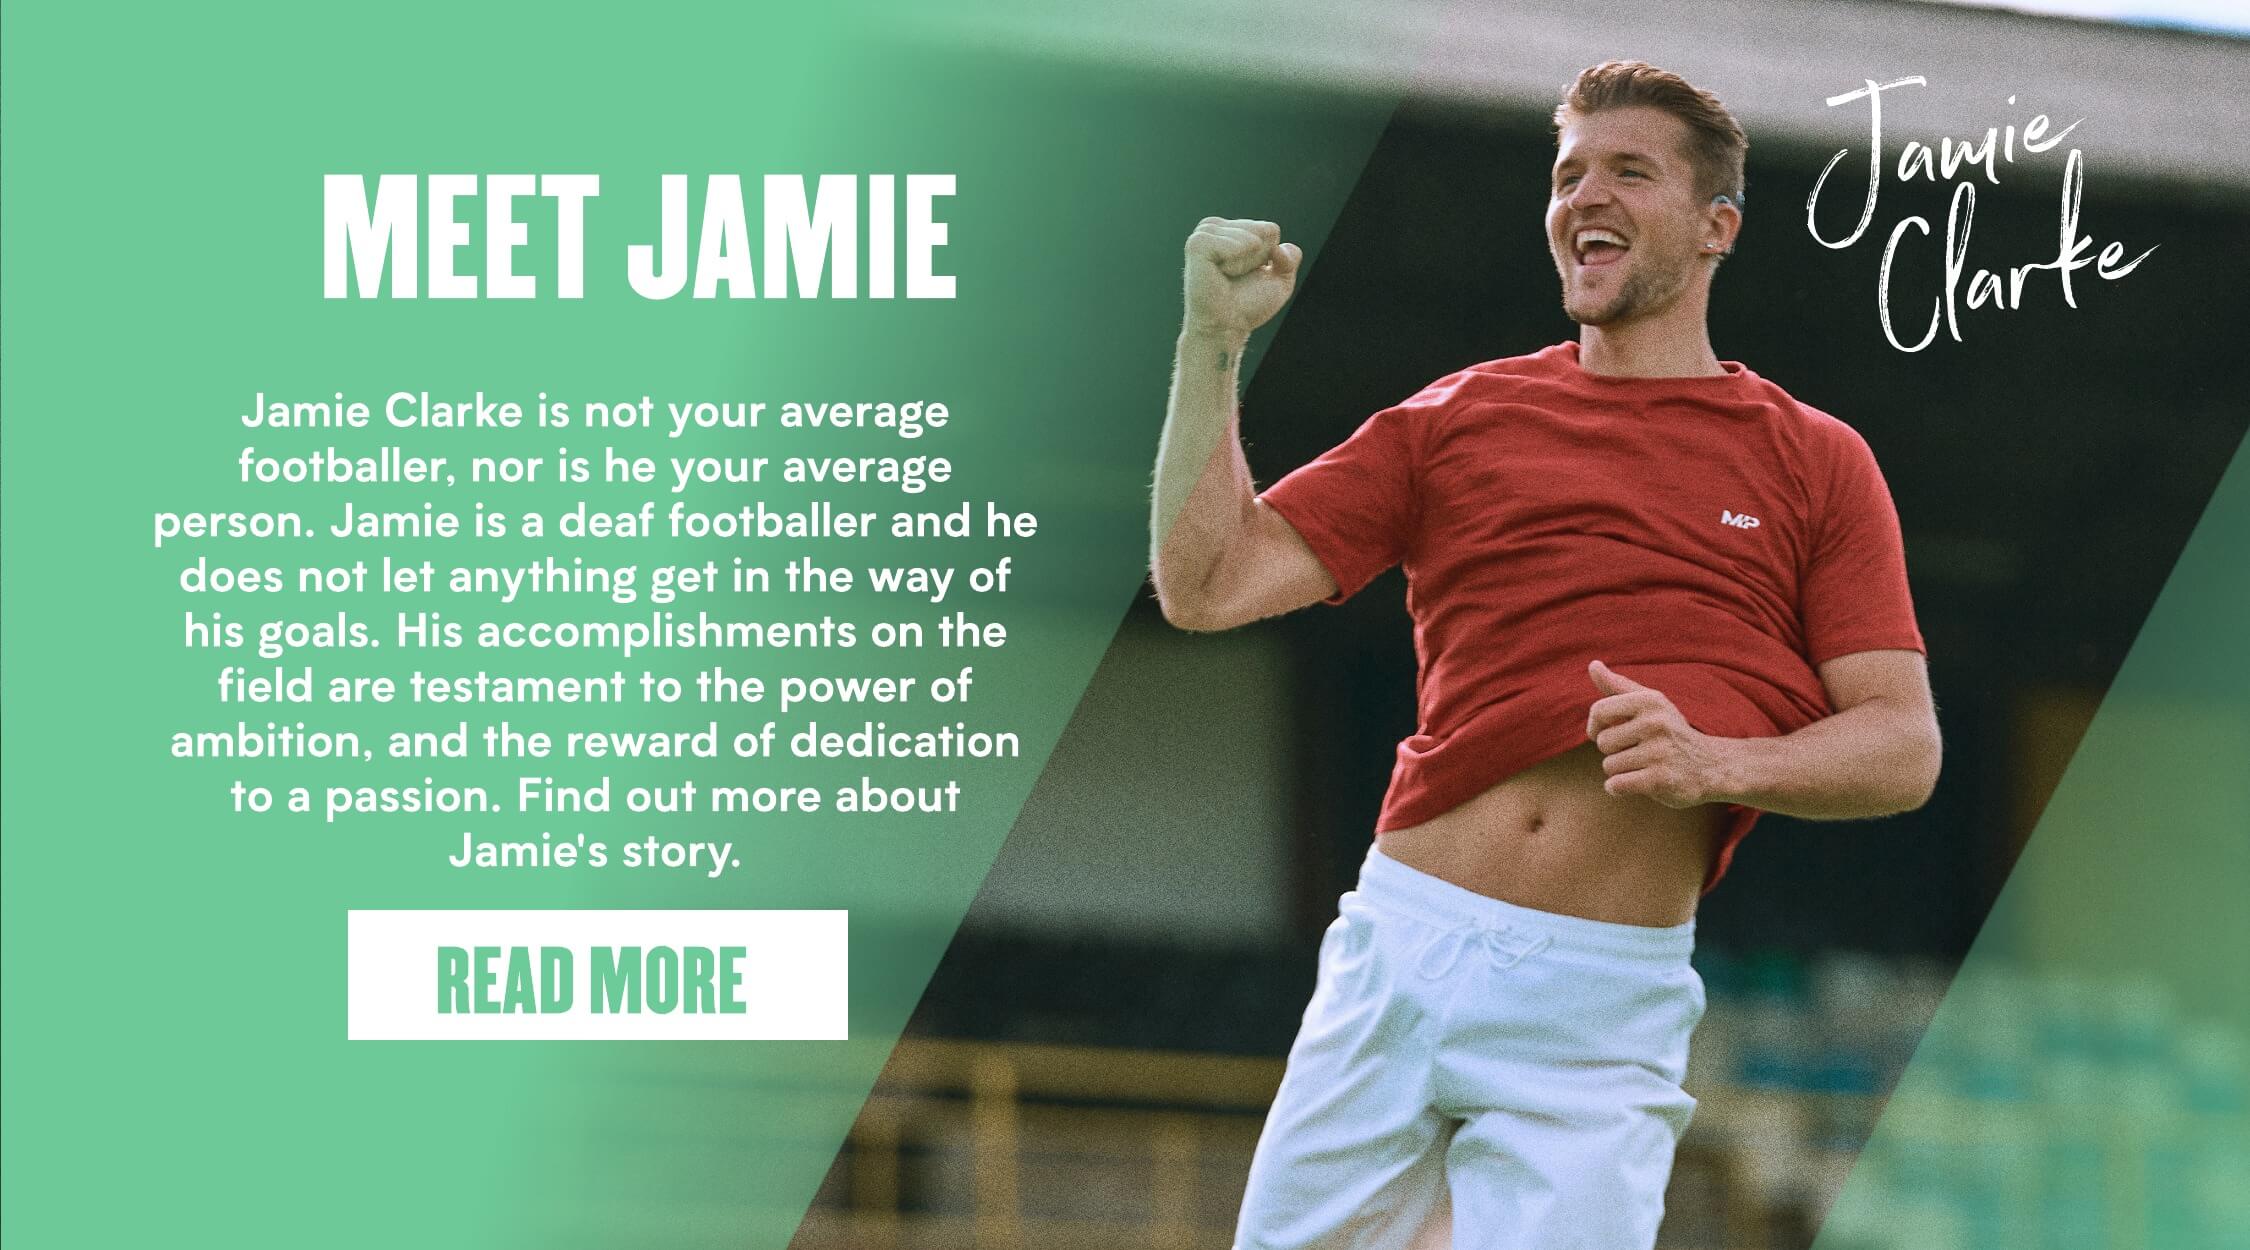 https://www.myprotein.ie/blog/our-ambassadors/meet-jamie-clarke-decorator-off-the-pitch-decorated-on-it-050721/